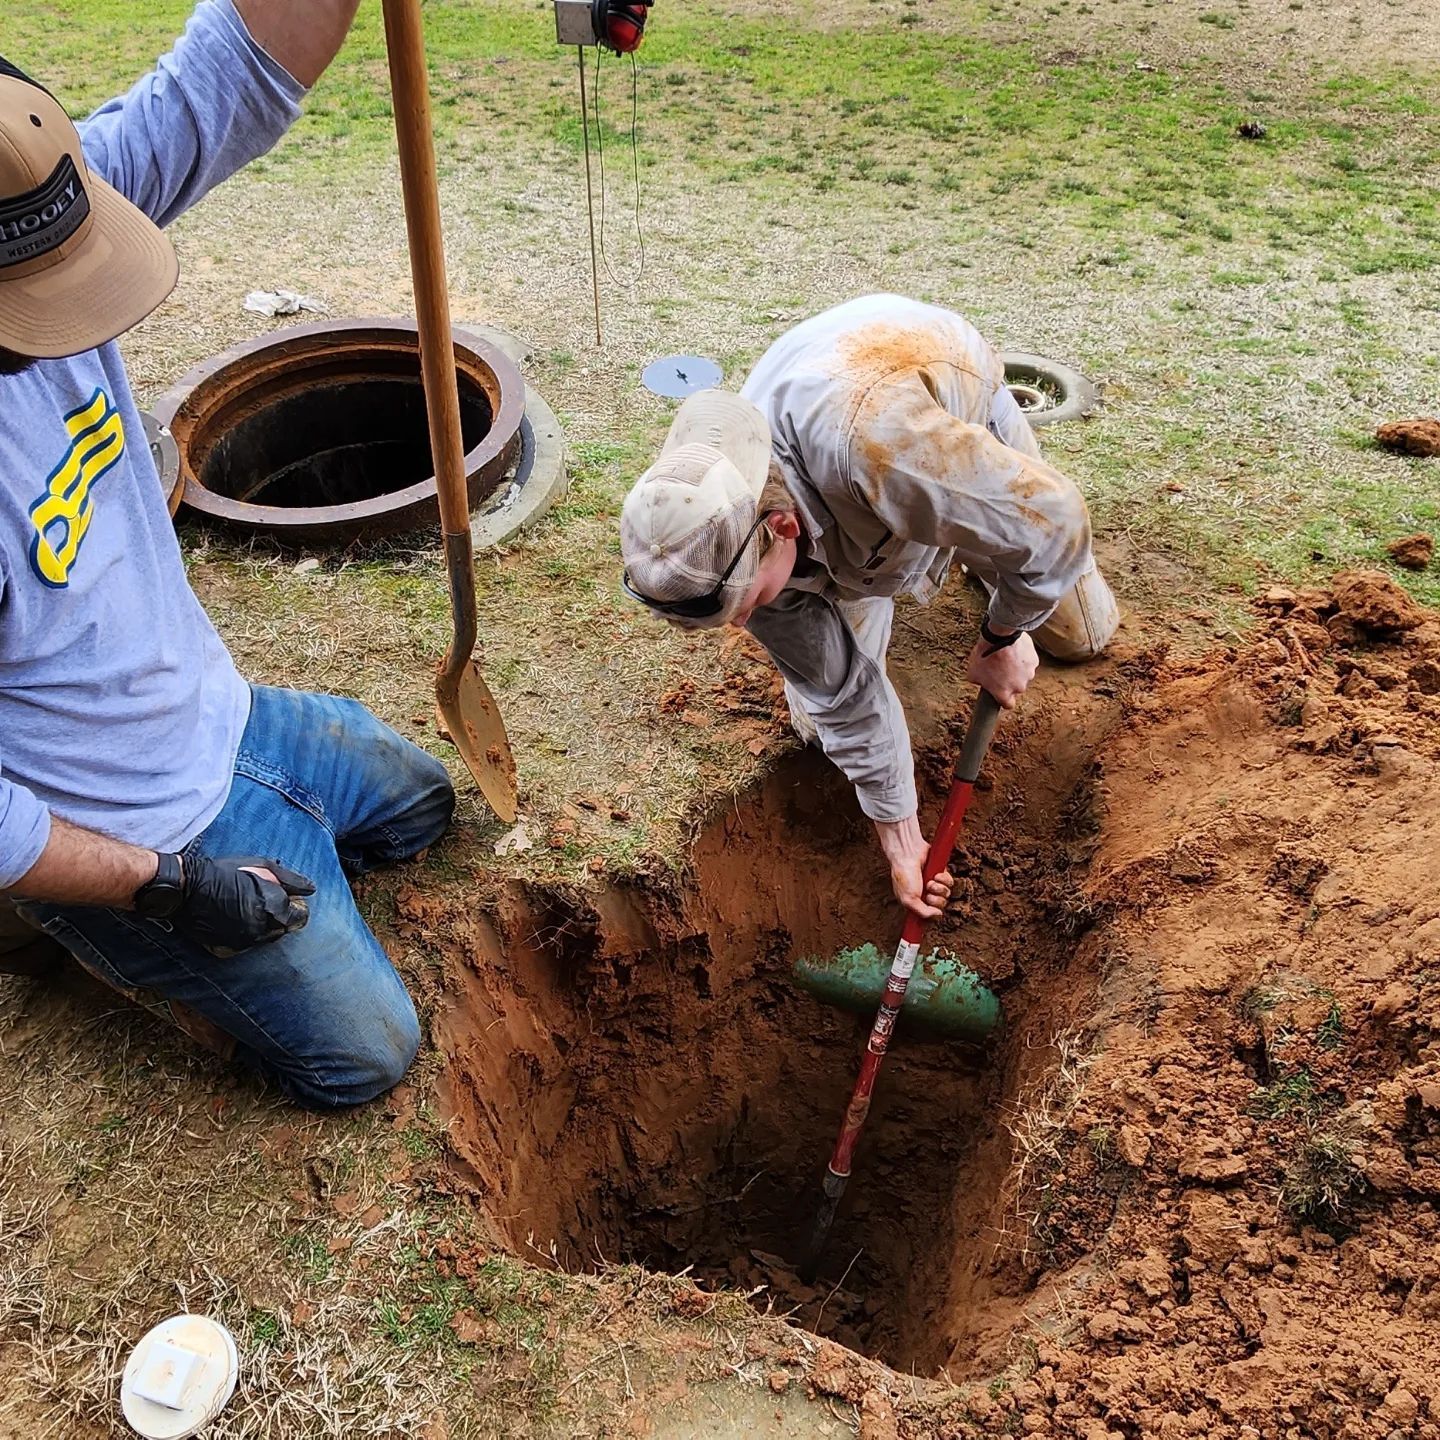 Mississippi Septic Tank Experts
